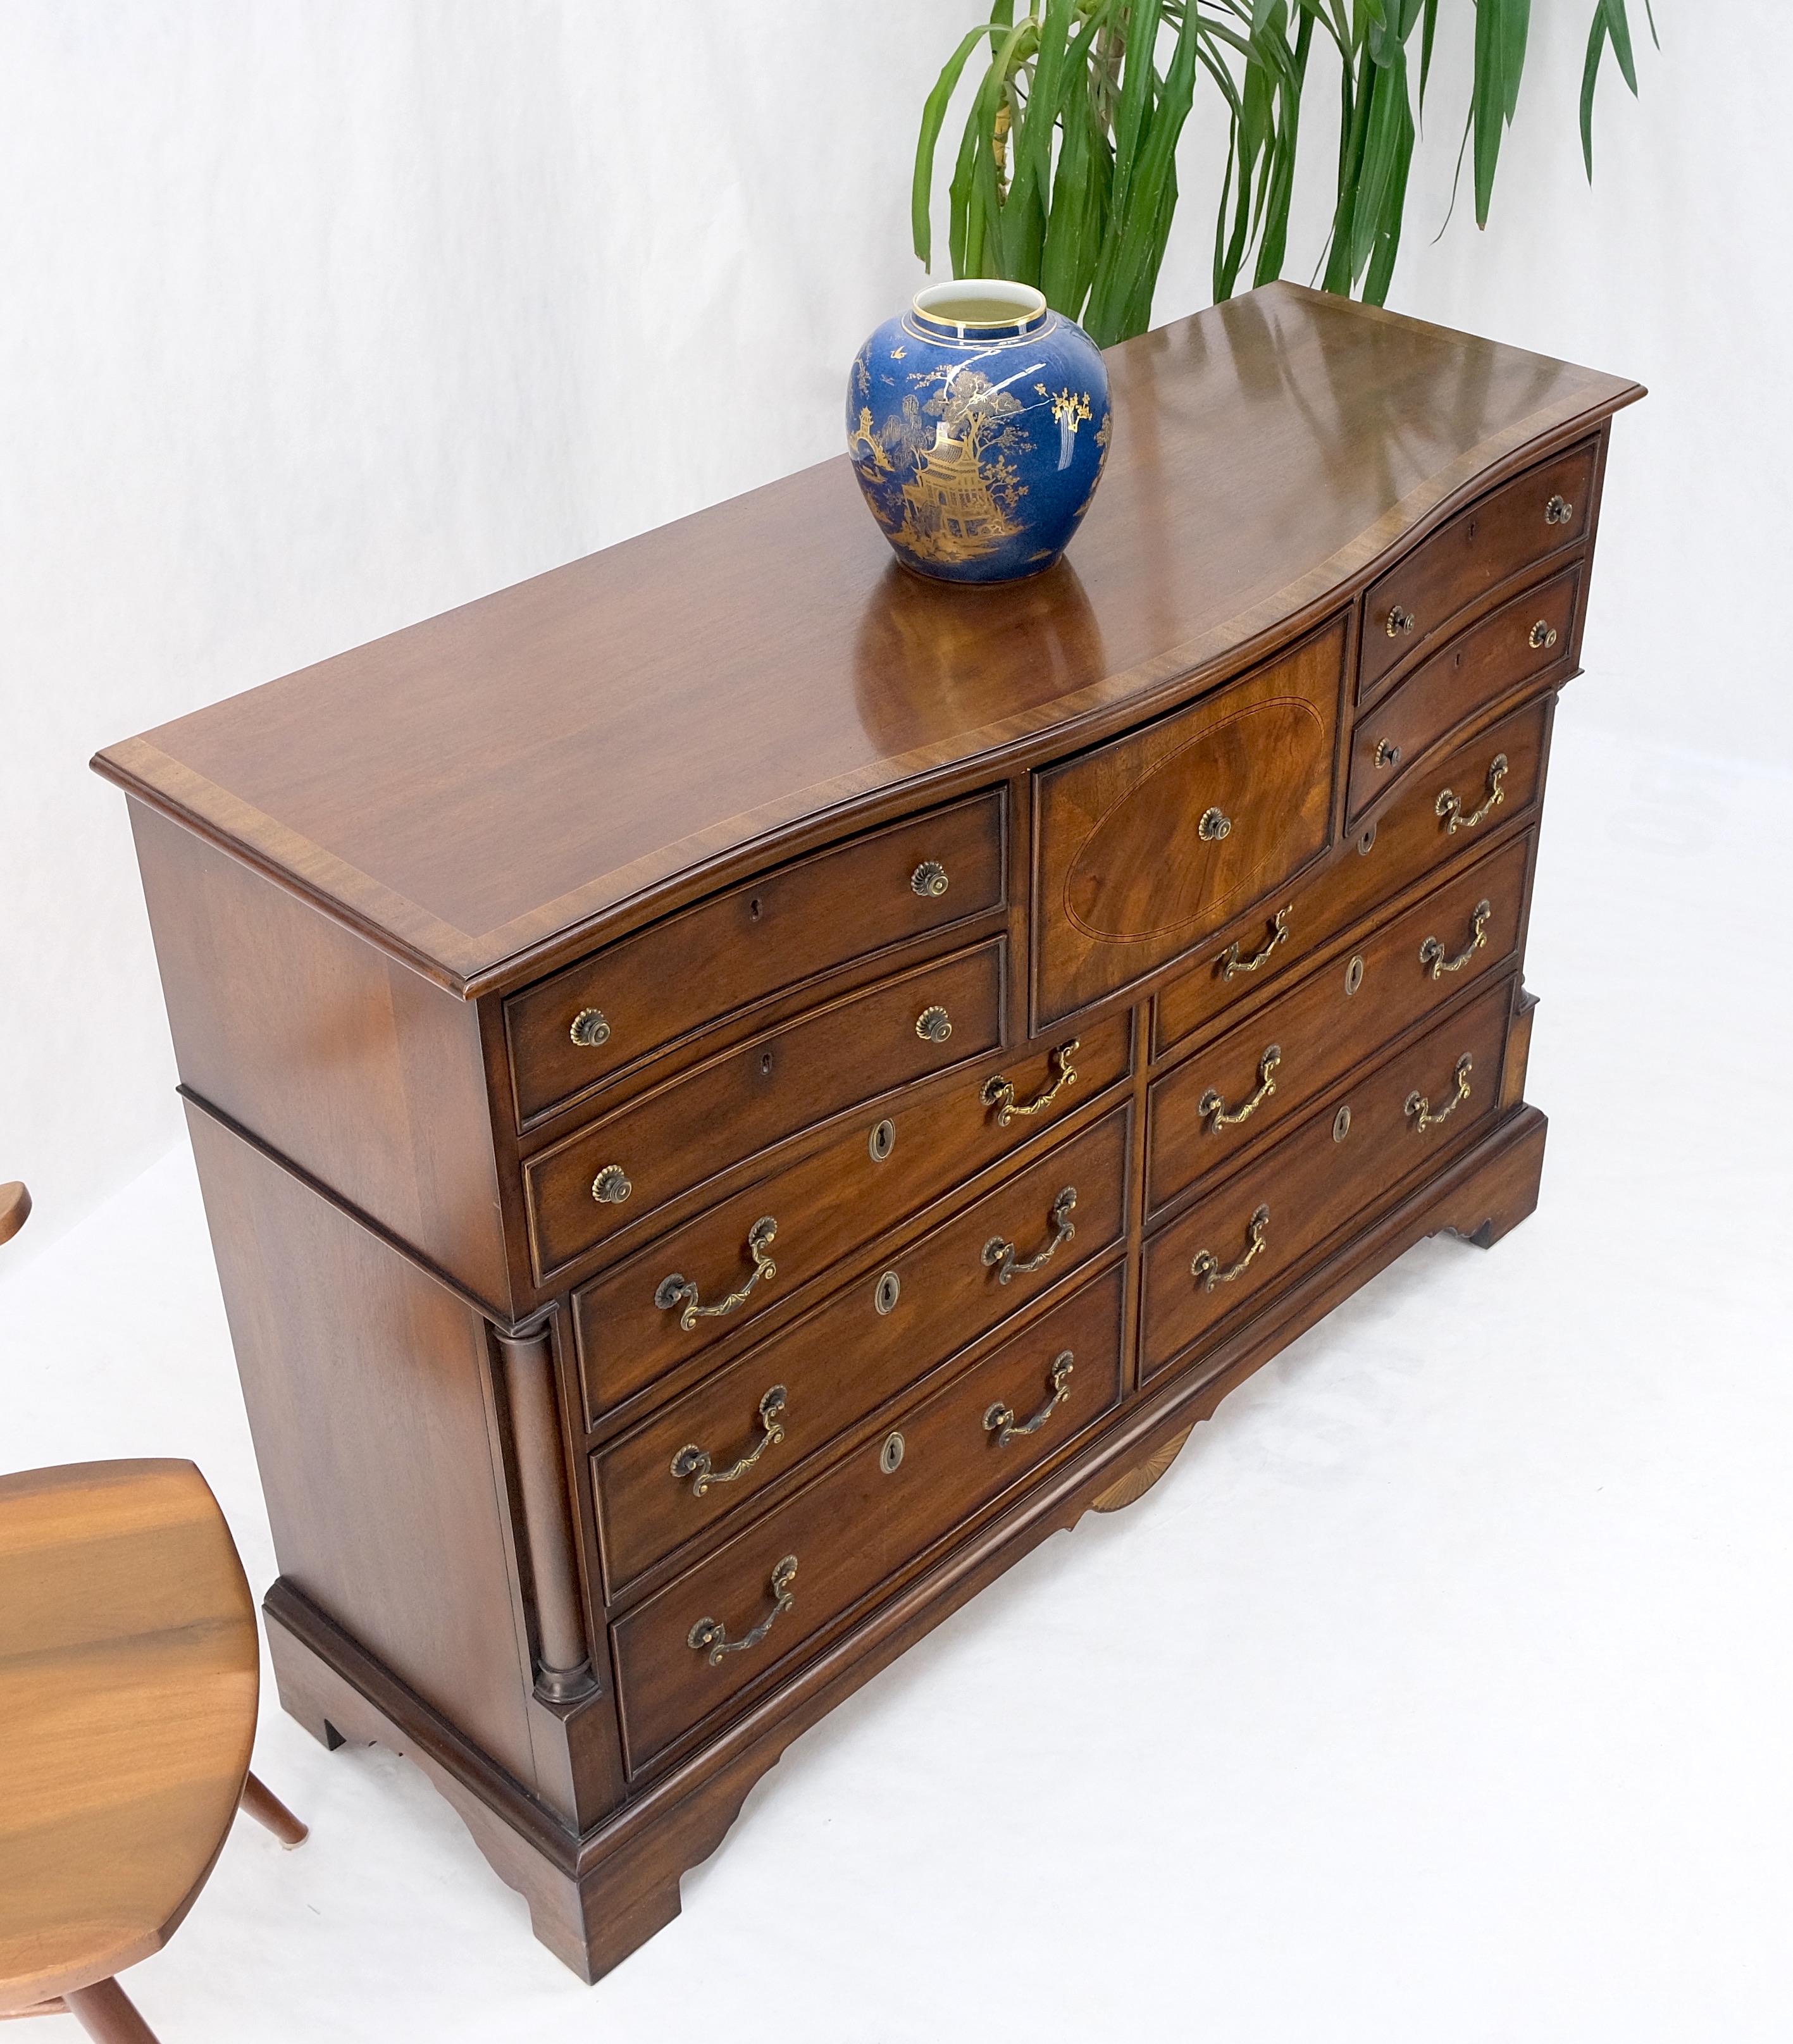 Banded Top Mahogany Inlayed Bracket Feet 11 Drawers Dresser Credenza MINT! For Sale 11